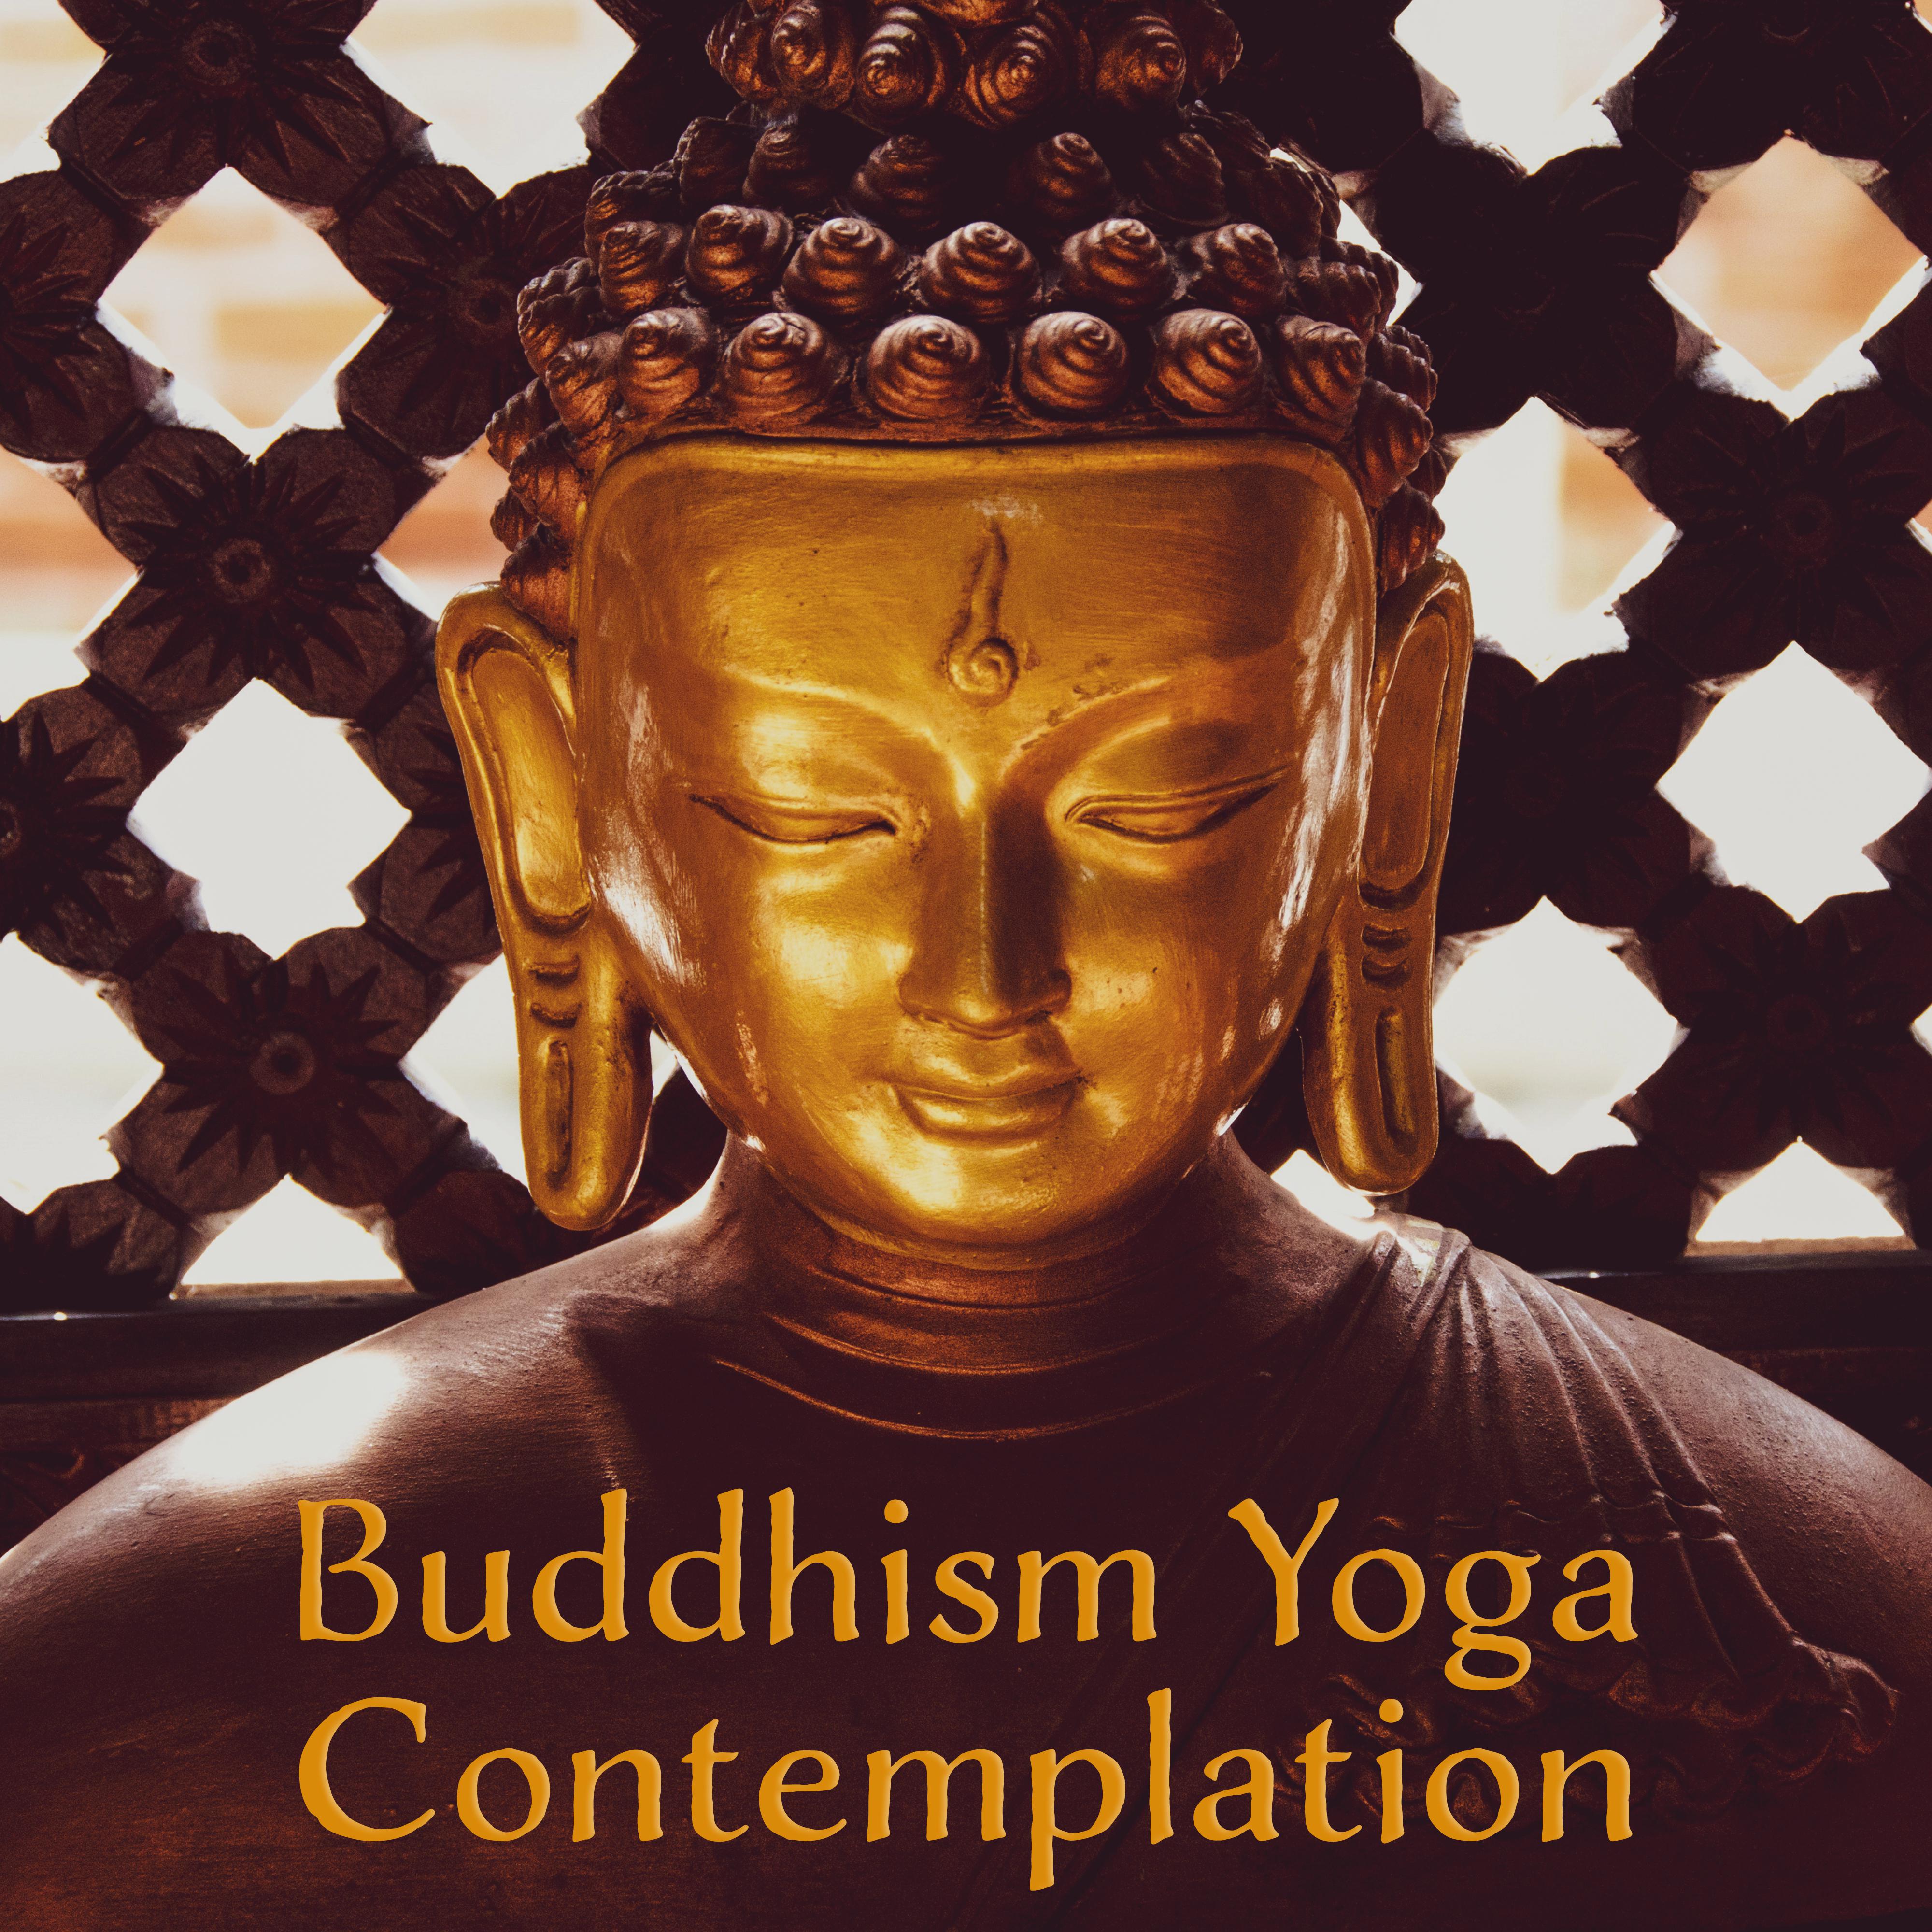 Buddhism Yoga Contemplation: Collection of 15 New Age Ambient Songs for Best Meditation & Relaxation Experience, Inner Bliss, Zen Awakening 2019 Music